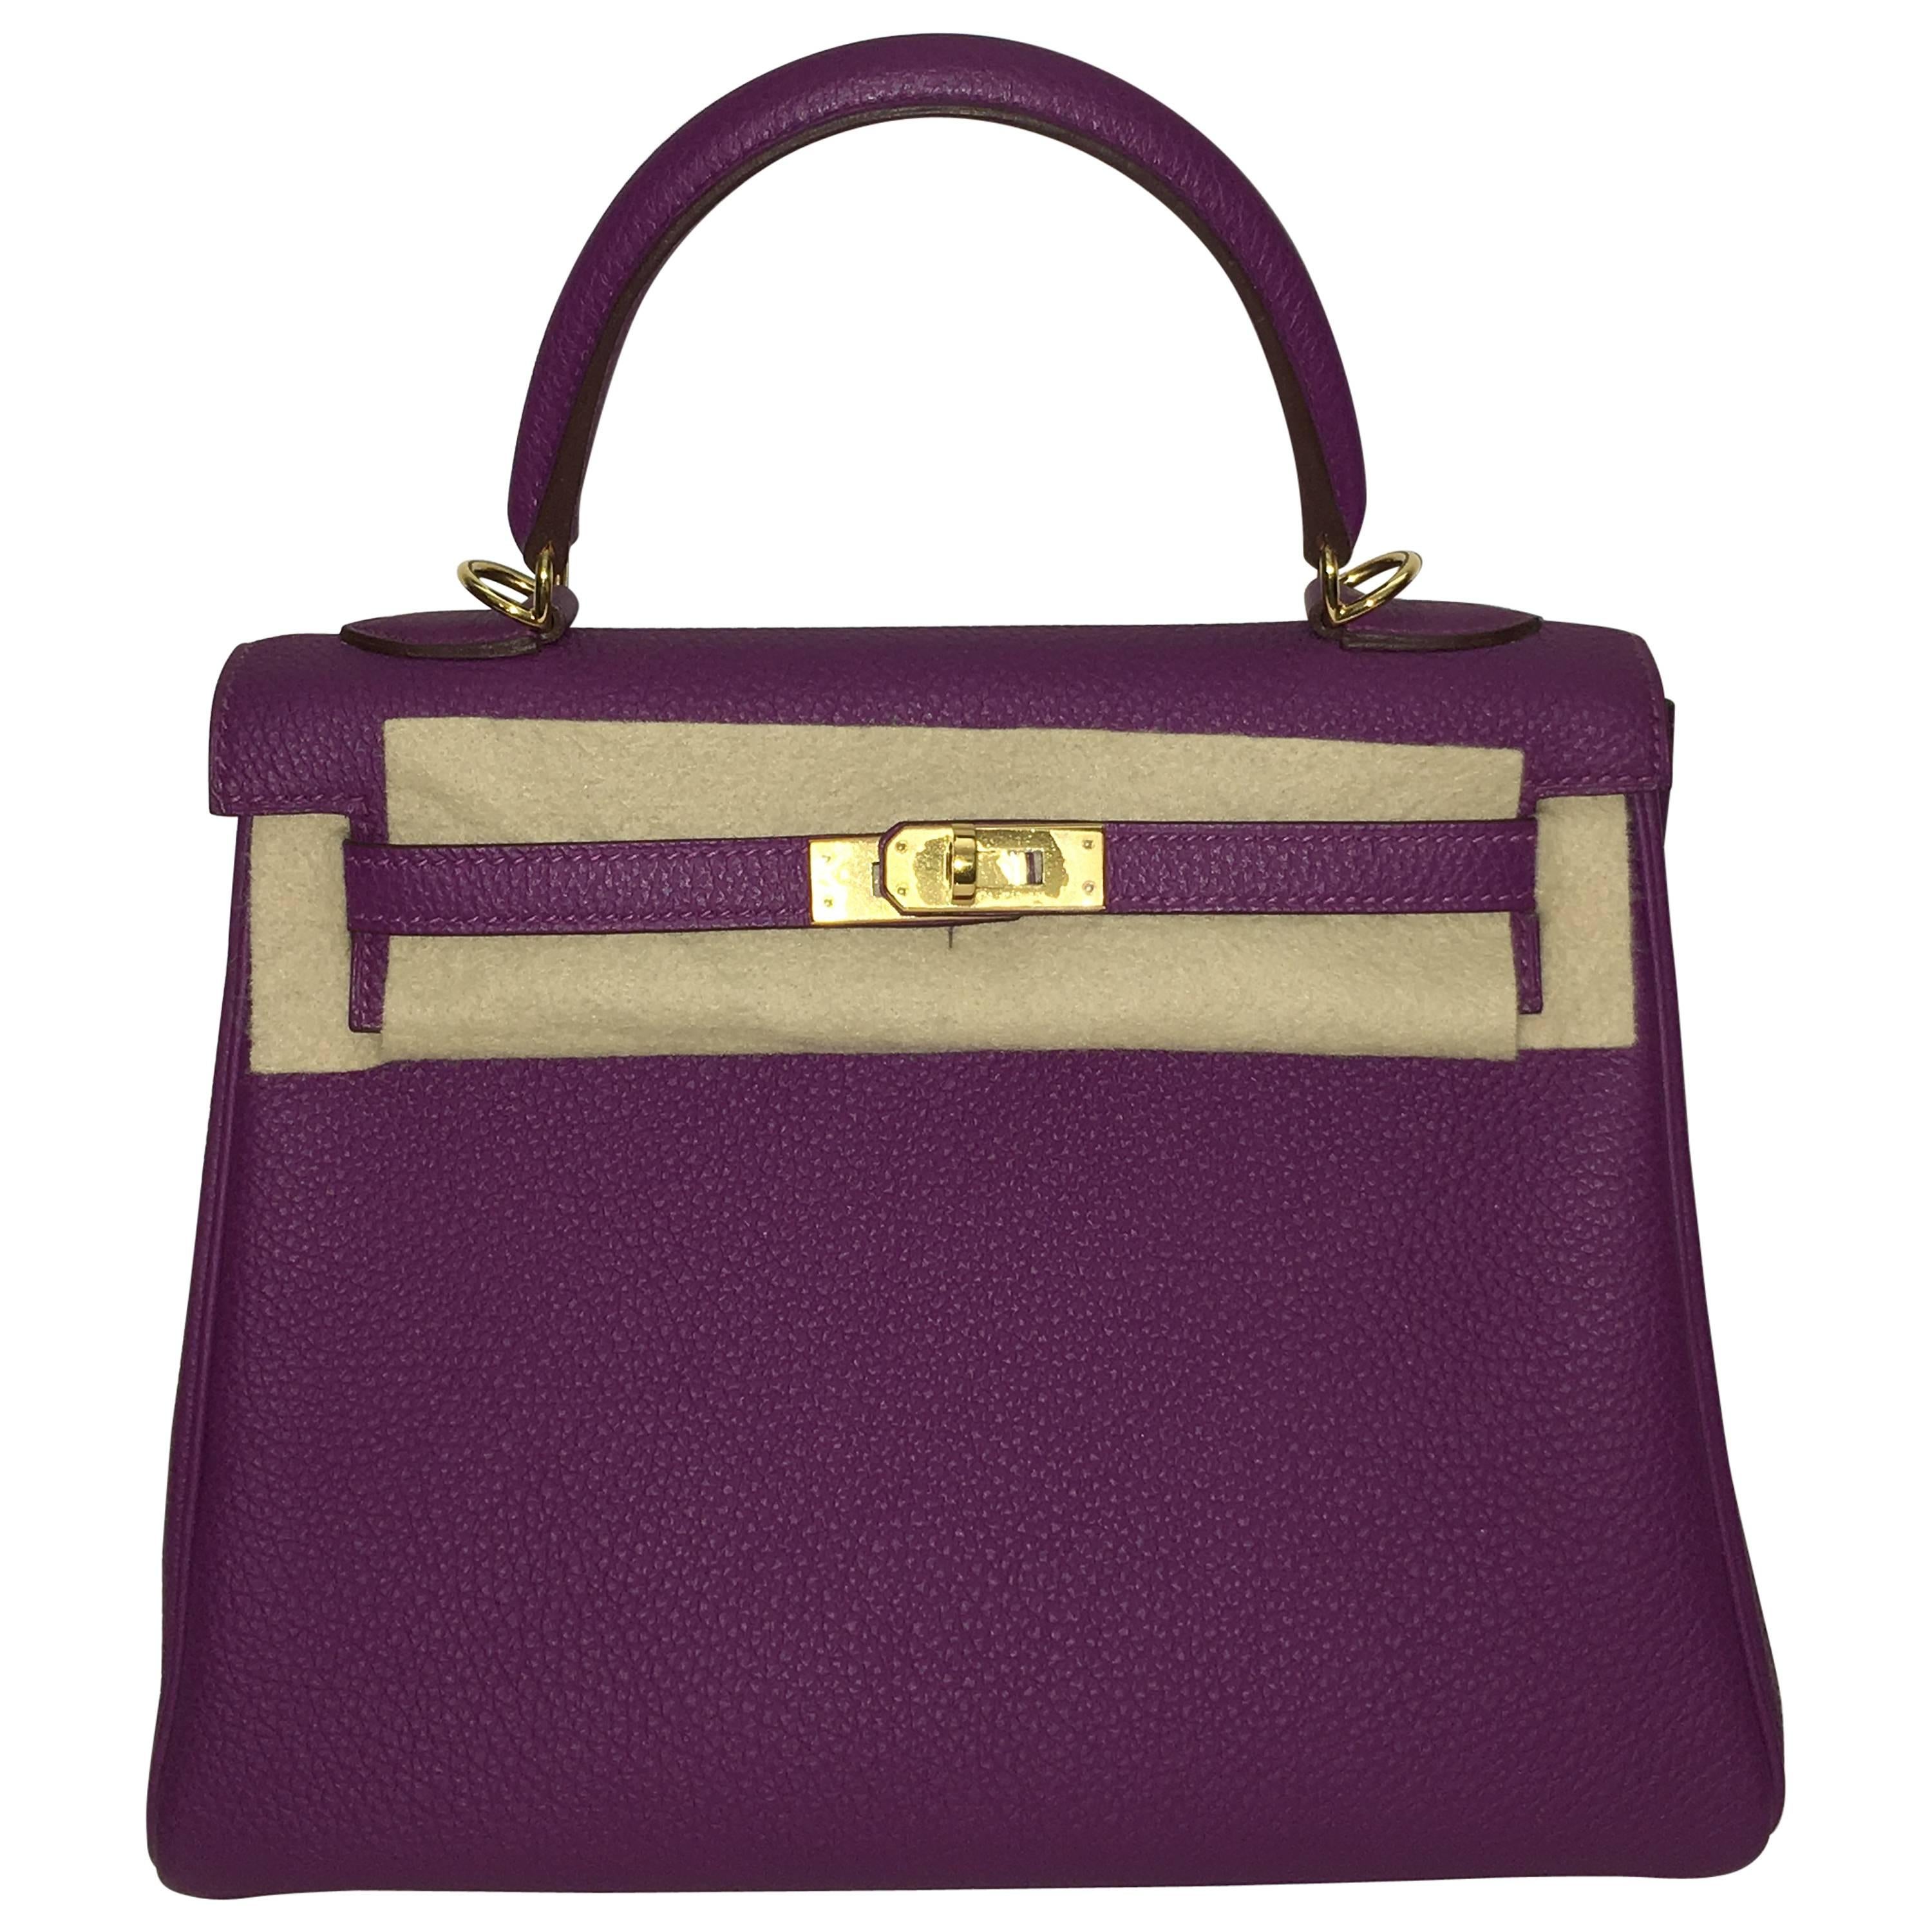 Brand New Hermes Kelly 25 Anemone Togo GHW For Sale